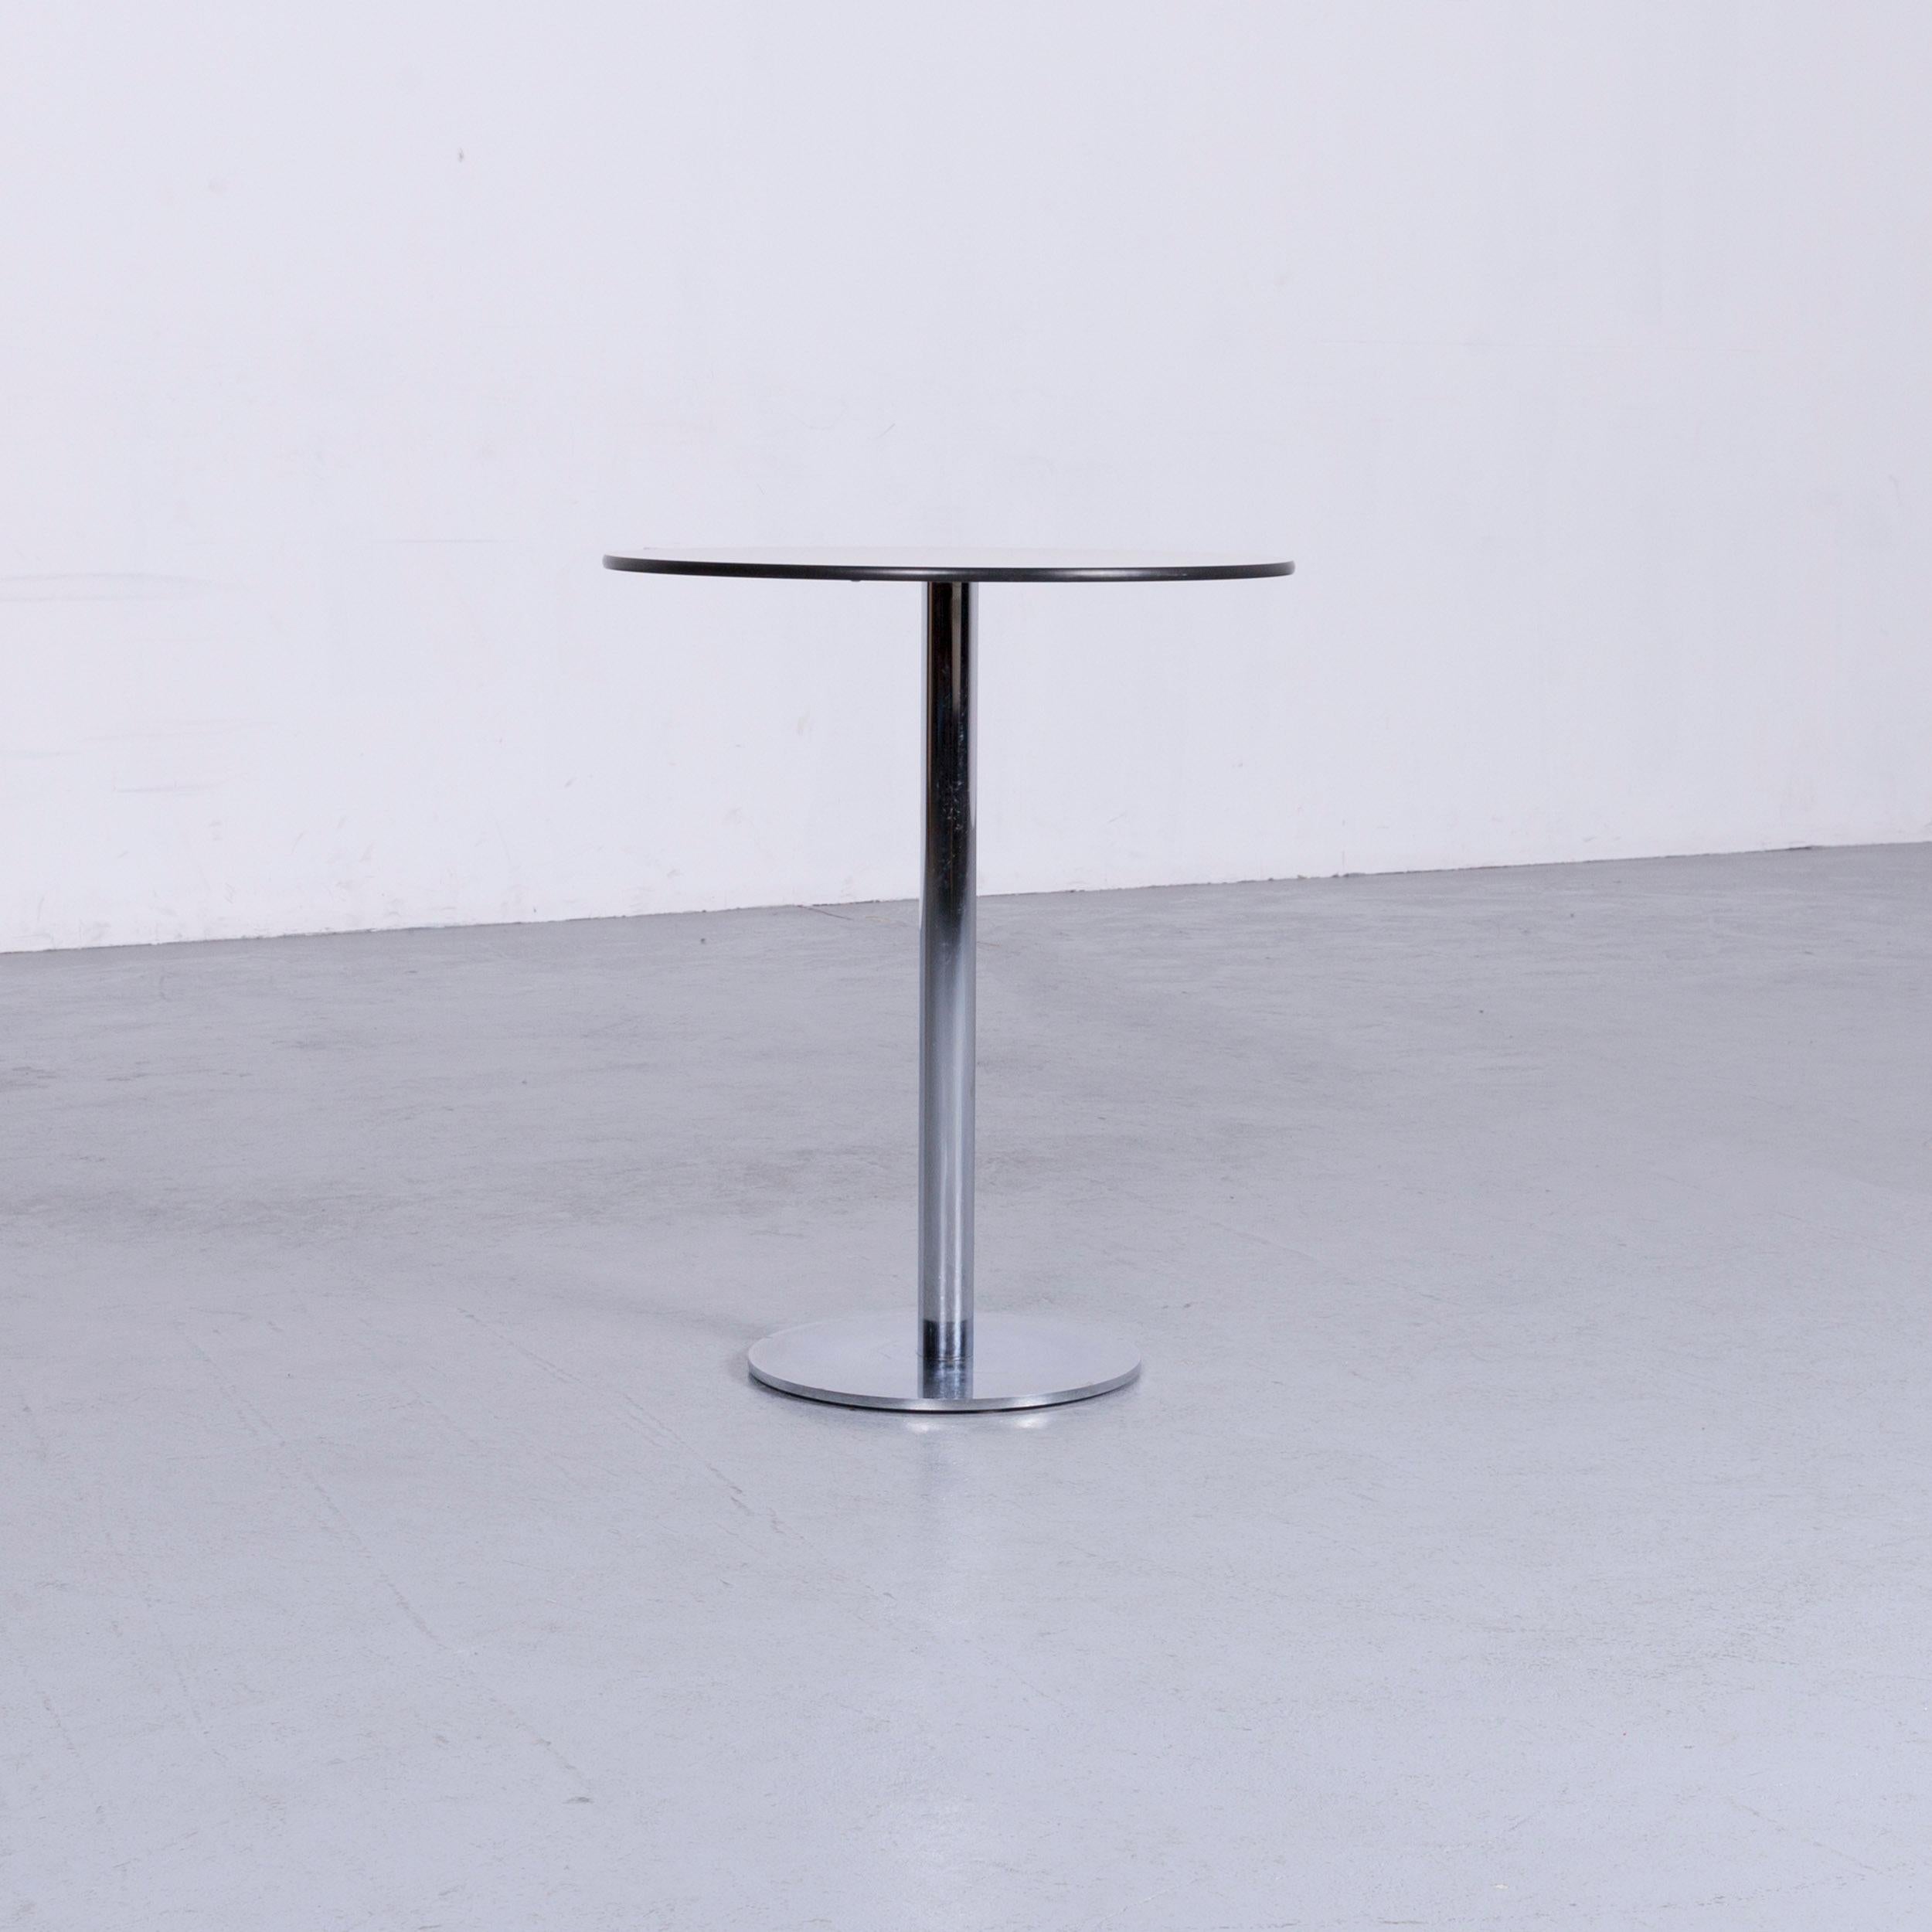 Silver grey colored Swiss air lounge designer table, in a minimalistic and modern design.